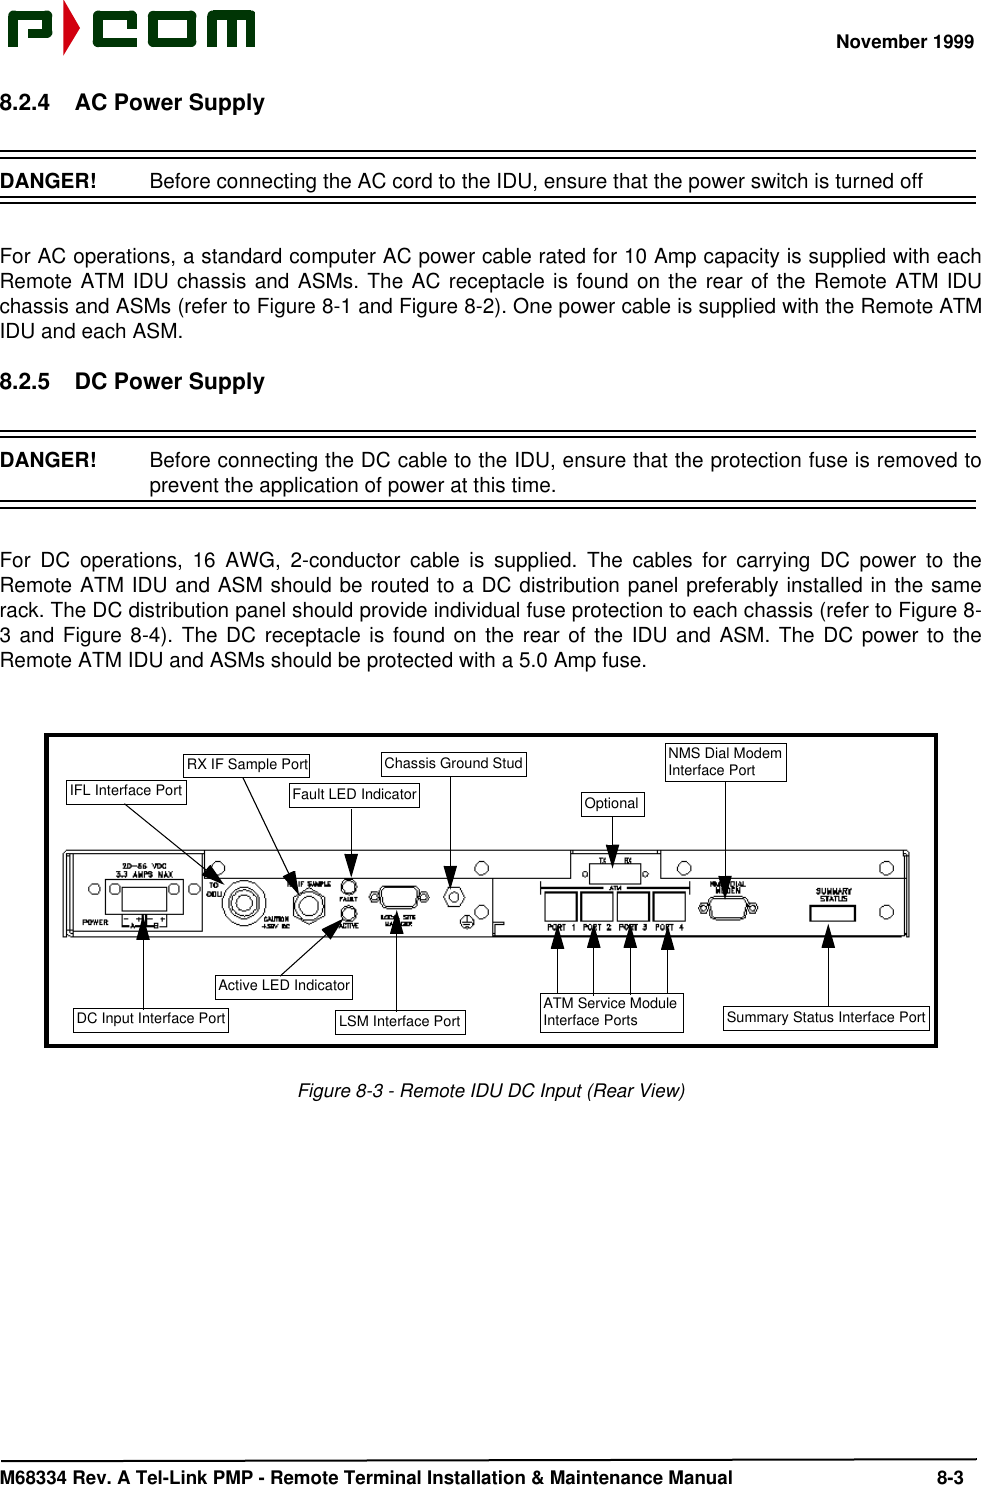 November 1999M68334 Rev. A Tel-Link PMP - Remote Terminal Installation &amp; Maintenance Manual 8-38.2.4 AC Power SupplyDANGER!  Before connecting the AC cord to the IDU, ensure that the power switch is turned offFor AC operations, a standard computer AC power cable rated for 10 Amp capacity is supplied with eachRemote ATM IDU chassis and ASMs. The AC receptacle is found on the rear of the Remote ATM IDUchassis and ASMs (refer to Figure 8-1 and Figure 8-2). One power cable is supplied with the Remote ATMIDU and each ASM. 8.2.5 DC Power SupplyDANGER!  Before connecting the DC cable to the IDU, ensure that the protection fuse is removed toprevent the application of power at this time.For DC operations, 16 AWG, 2-conductor cable is supplied. The cables for carrying DC power to theRemote ATM IDU and ASM should be routed to a DC distribution panel preferably installed in the samerack. The DC distribution panel should provide individual fuse protection to each chassis (refer to Figure 8-3 and Figure 8-4). The DC receptacle is found on the rear of the IDU and ASM. The DC power to theRemote ATM IDU and ASMs should be protected with a 5.0 Amp fuse.Figure 8-3 - Remote IDU DC Input (Rear View)DC Input Interface PortIFL Interface PortLSM Interface PortActive LED IndicatorFault LED IndicatorChassis Ground StudSummary Status Interface PortNMS Dial ModemInterface PortATM Service ModuleInterface PortsOptionalRX IF Sample Port